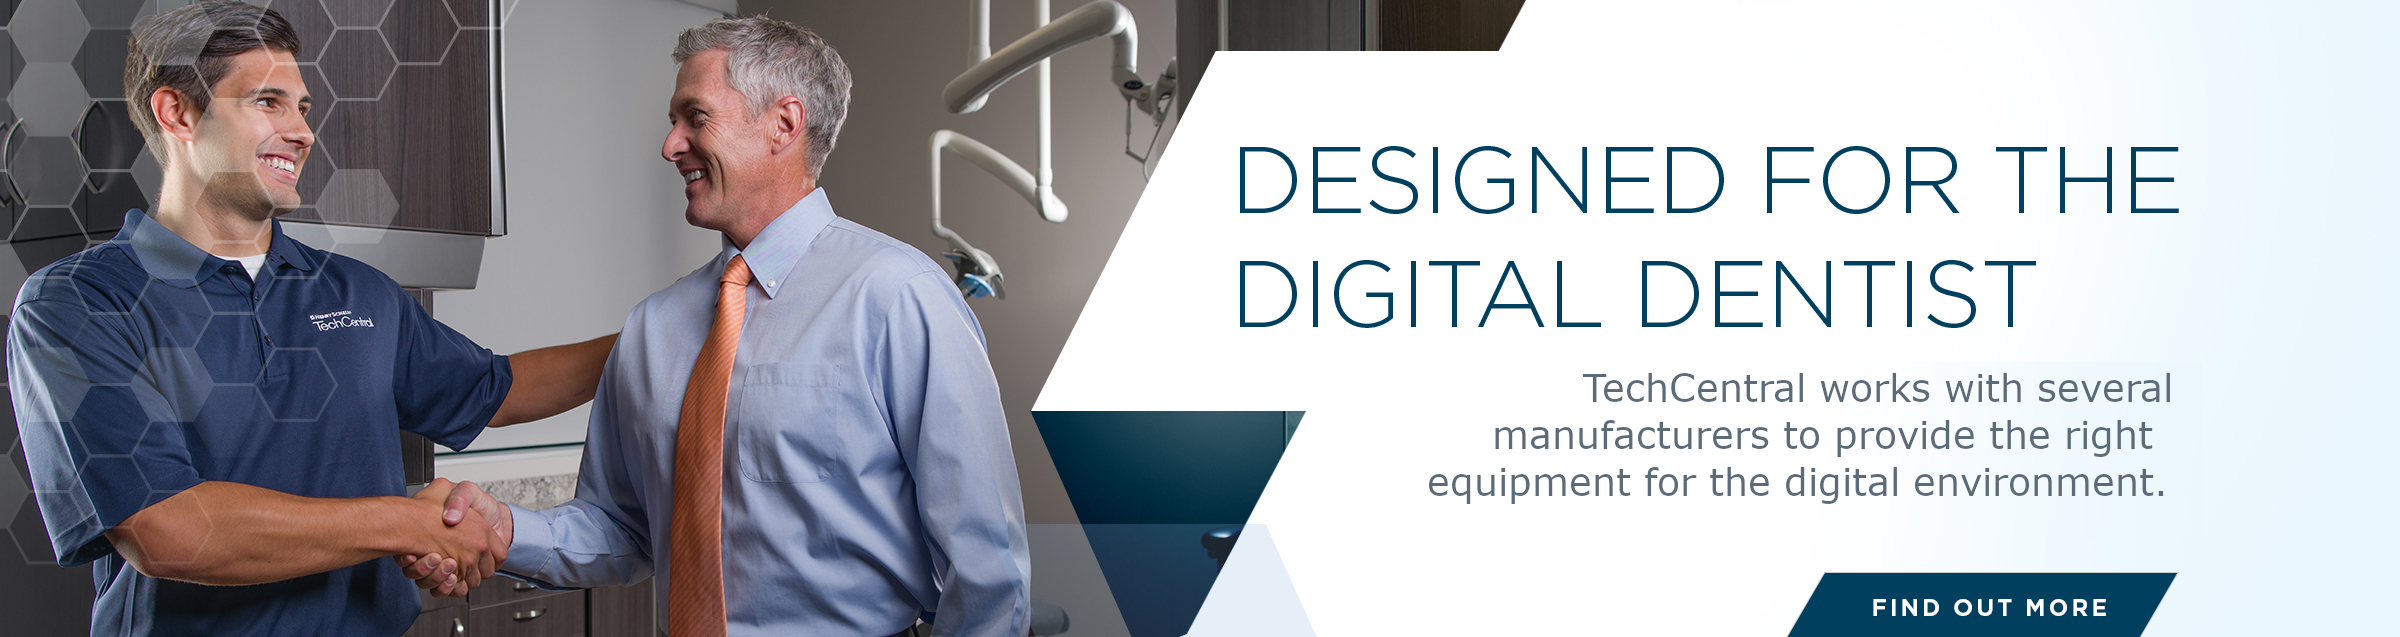 Designed For the Digital Dentist - TechCentral works with several manufacturers to provide the right equipment for the digital environment.